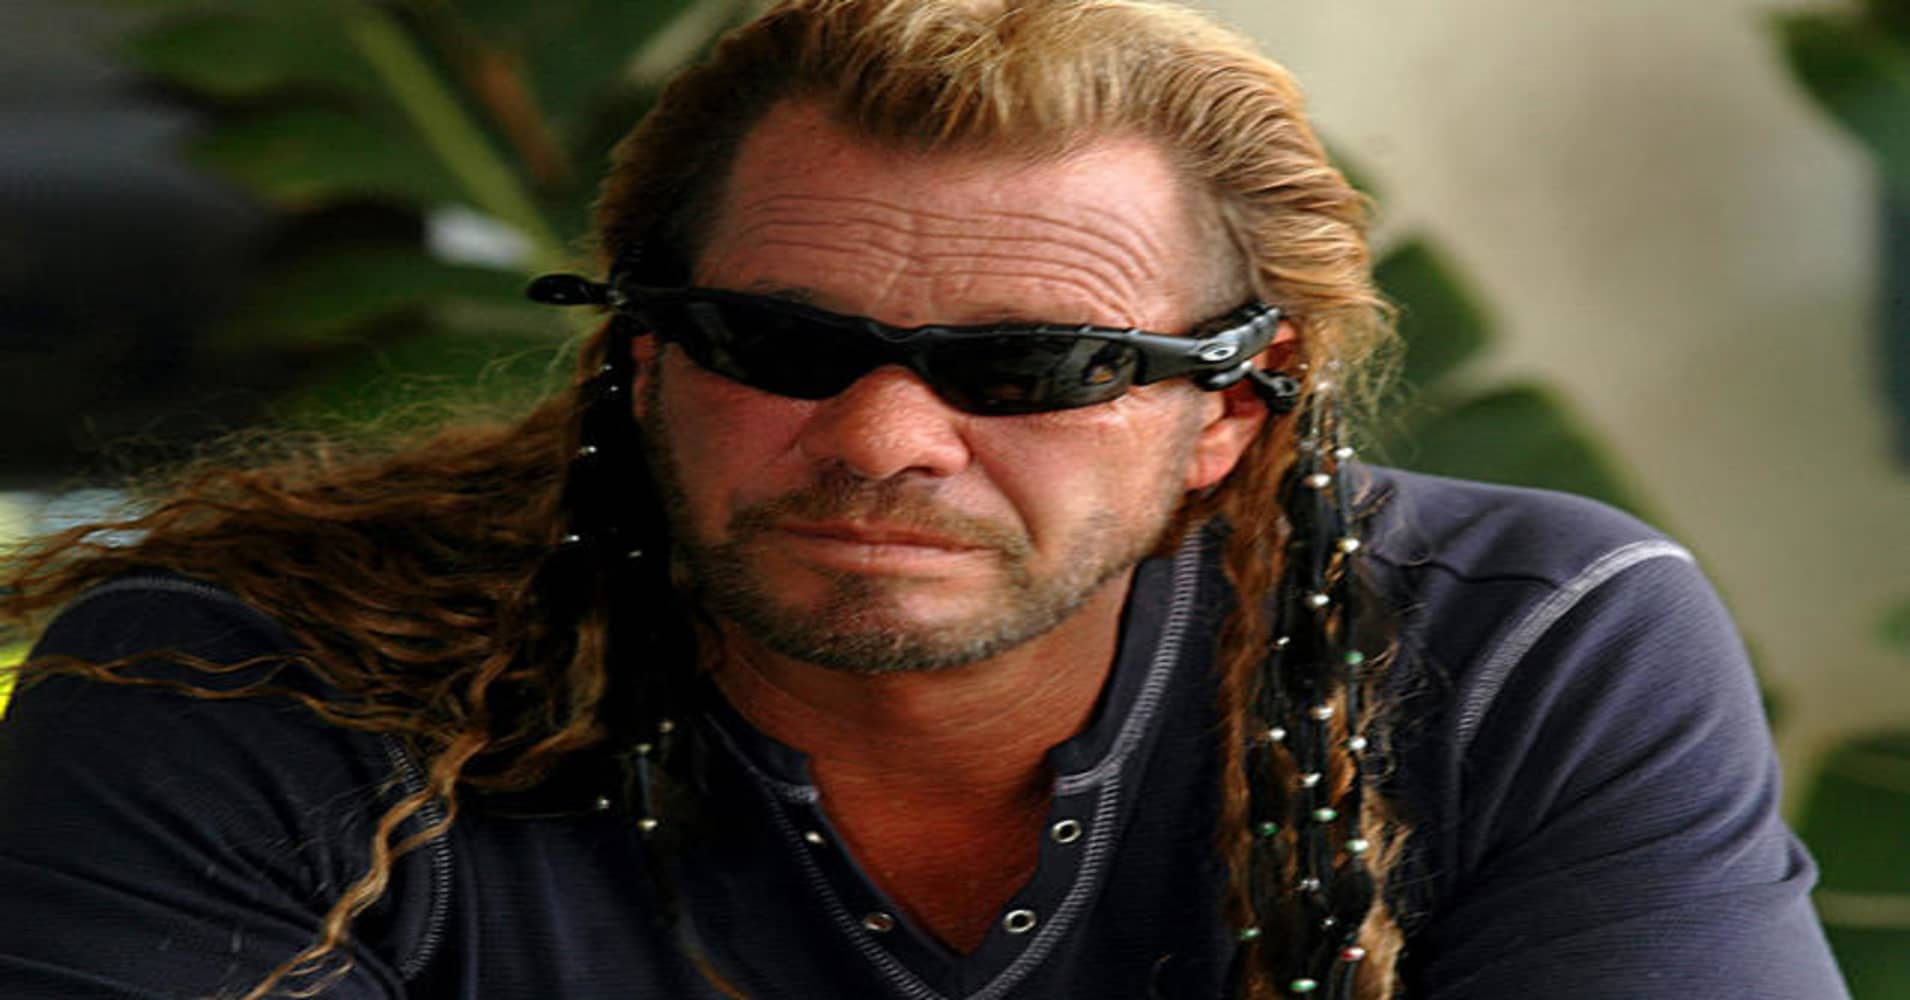 Prison the for what in was dog bounty hunter Dog The